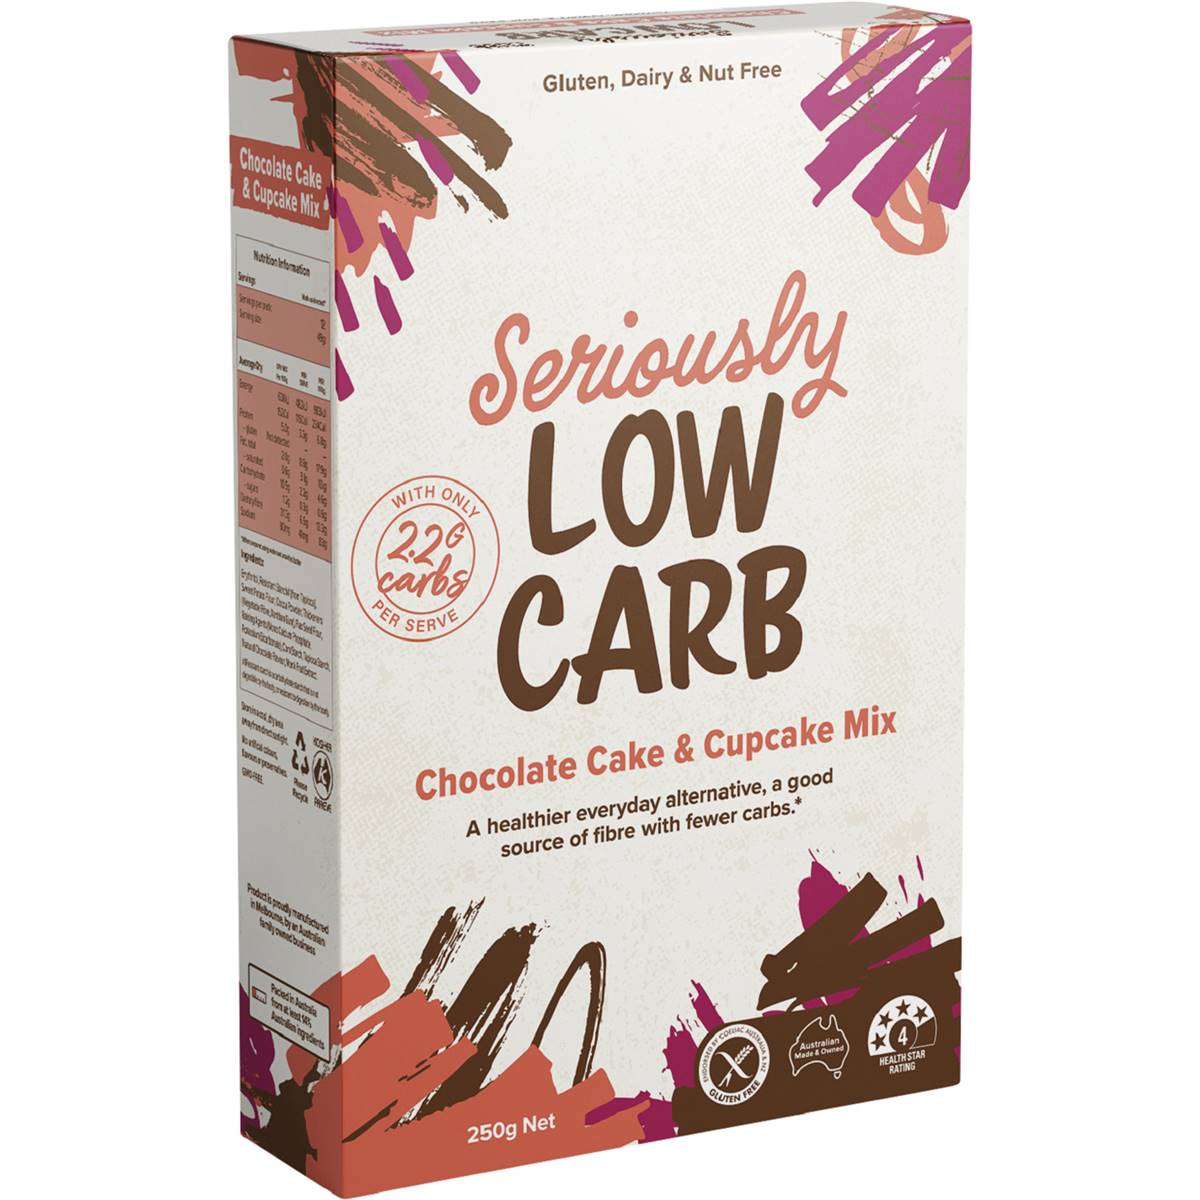 Calories in Seriously Low Carb Chocolate Cake & Cupcake Mix